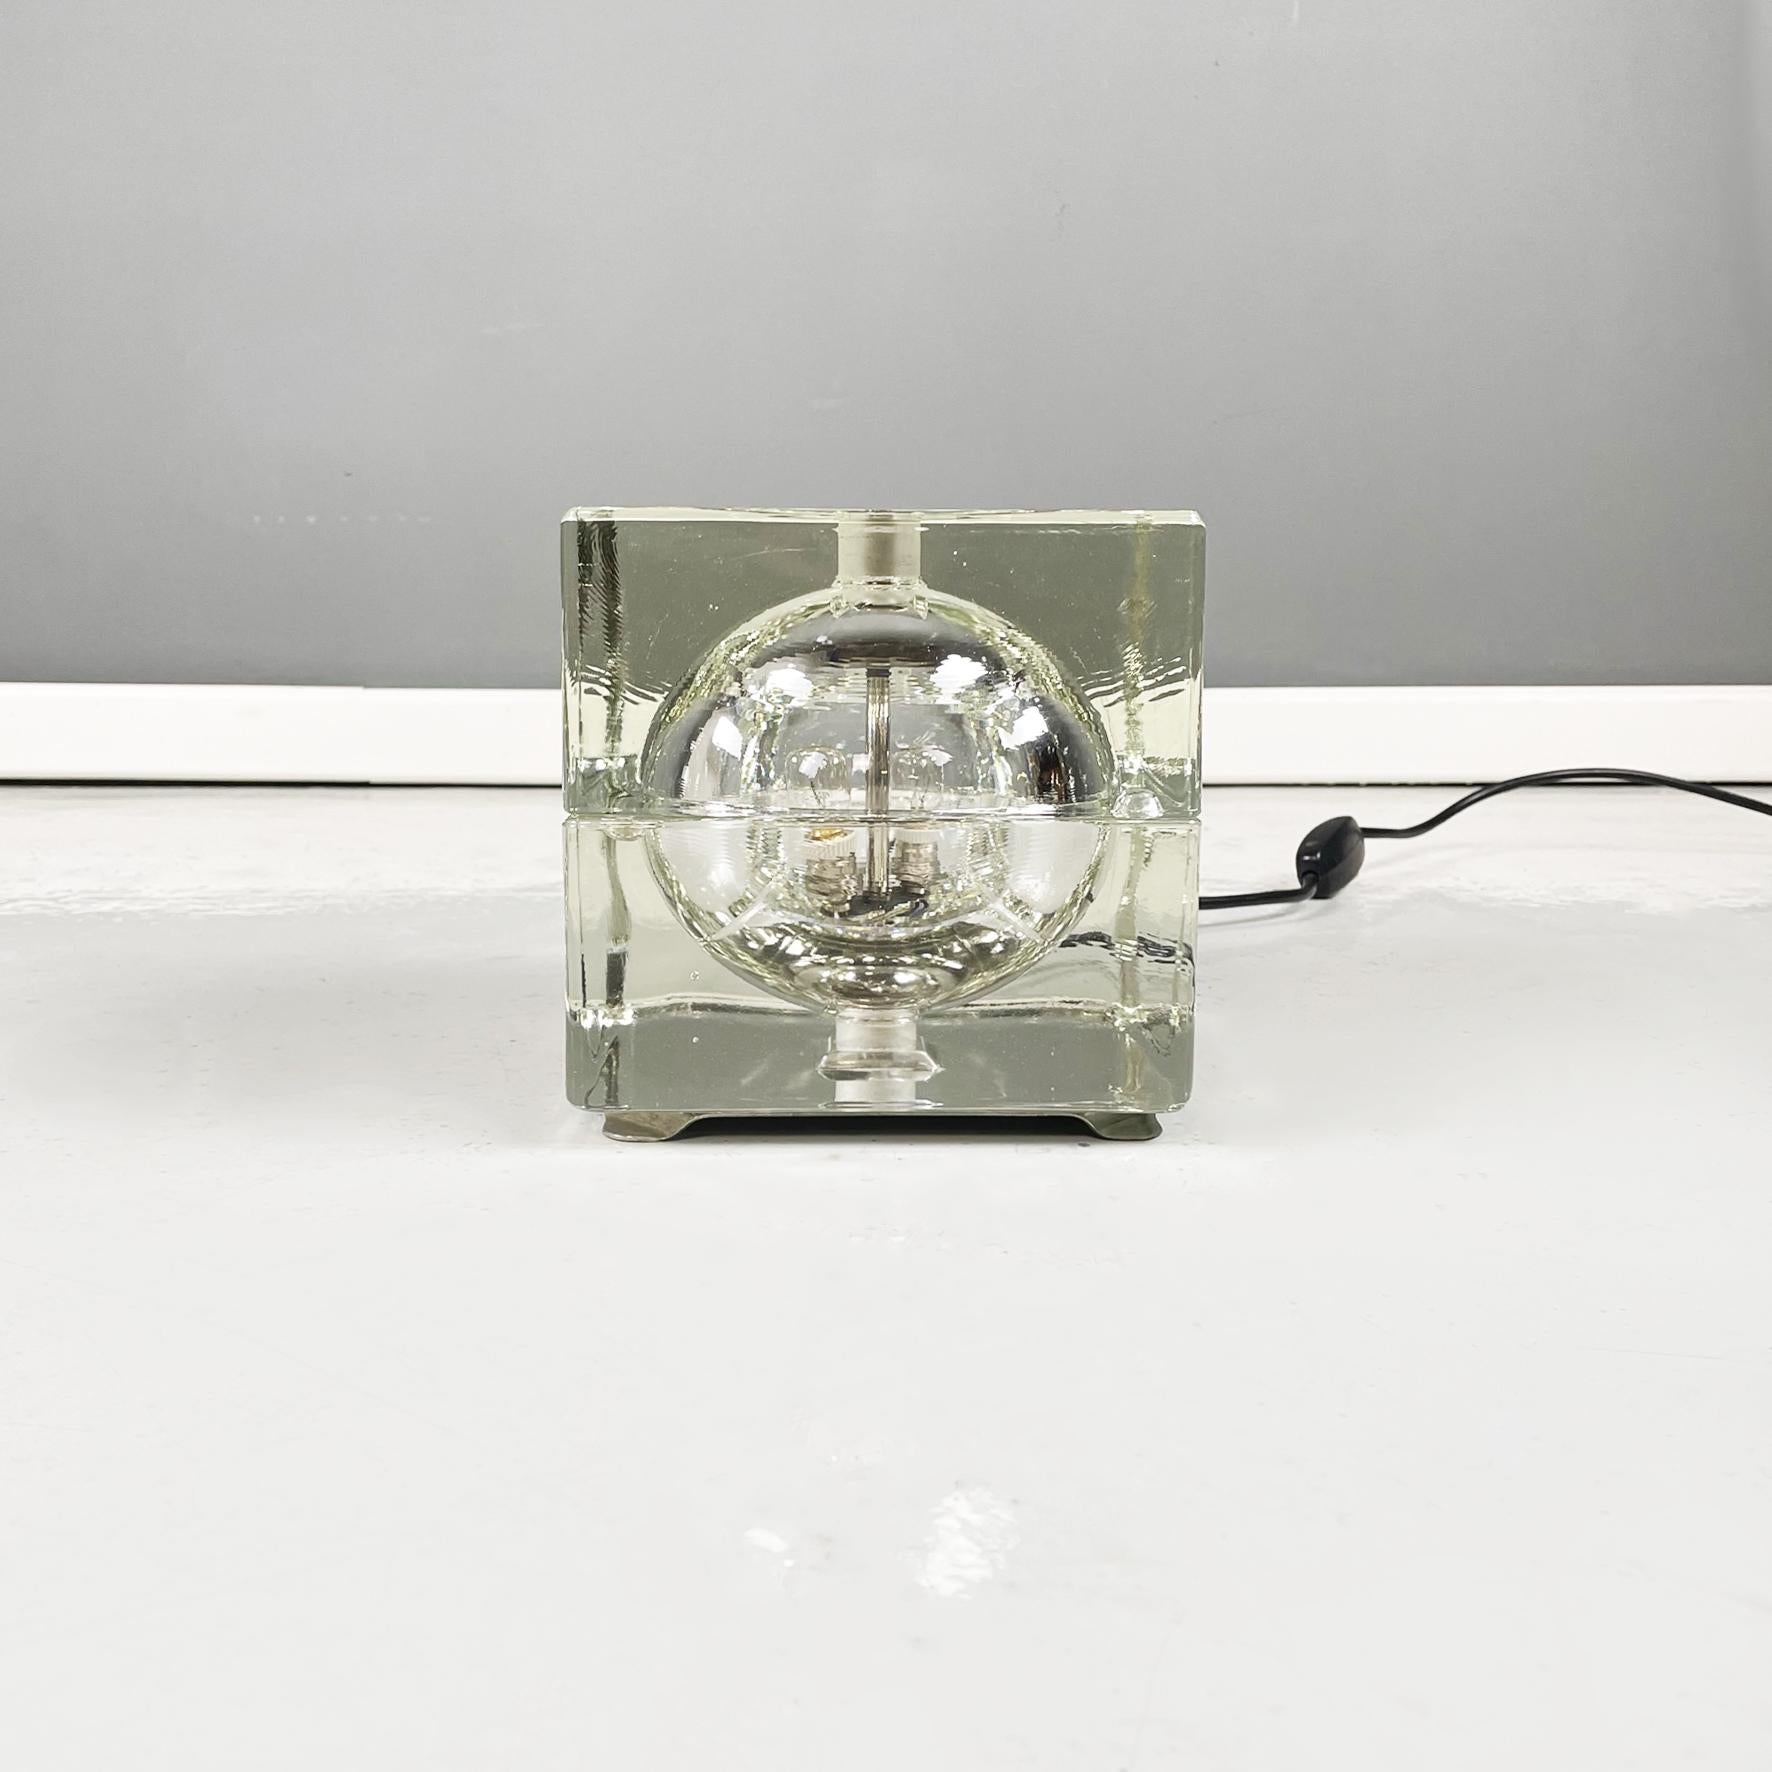 Italian modern Glass Table lamp mod. Cubosfera by Alessandro Mendini for Fidenza Vetraria, 1970s
Table lamp mod. Cubosfera with a square base in glass. The structure is composed of two semi-cubic parts placed one above the other, in the middle of